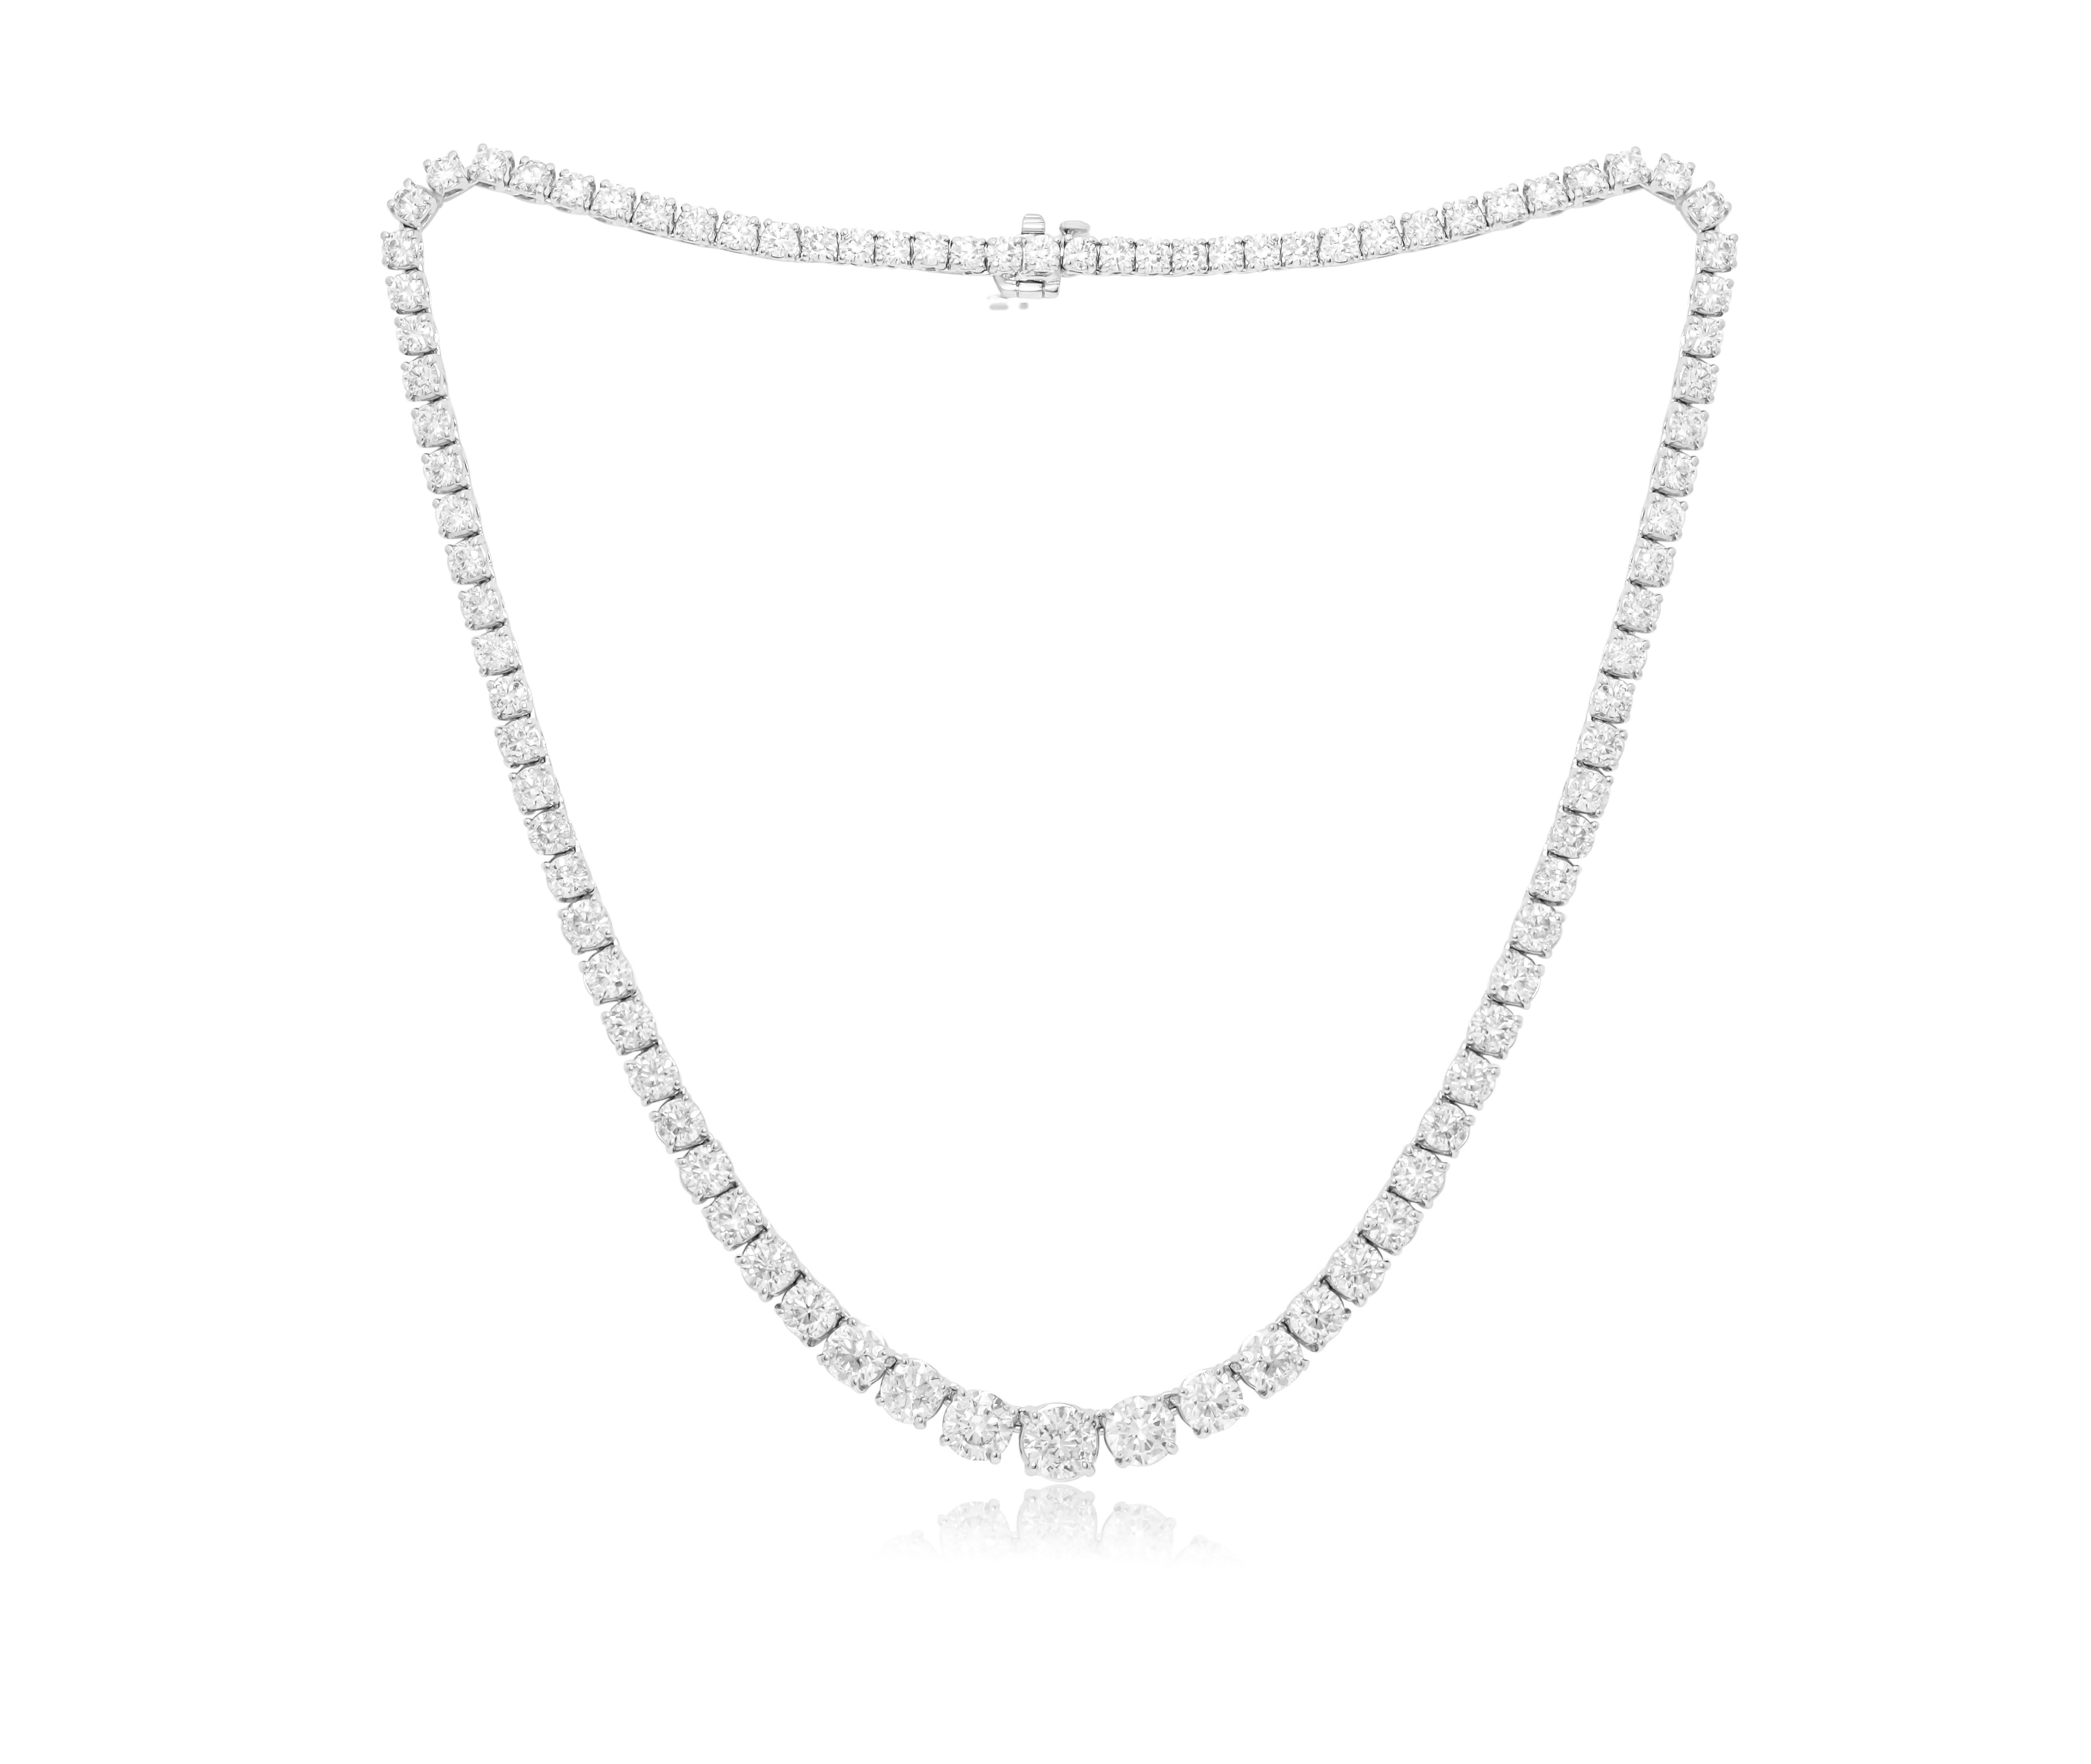  Custom 14k white gold graduated tennis necklace  20.00 cts round brilliant diamonds 93 stones 0.21 each set in a 4 prong setting FG color SI clarity. Excellent  cut
